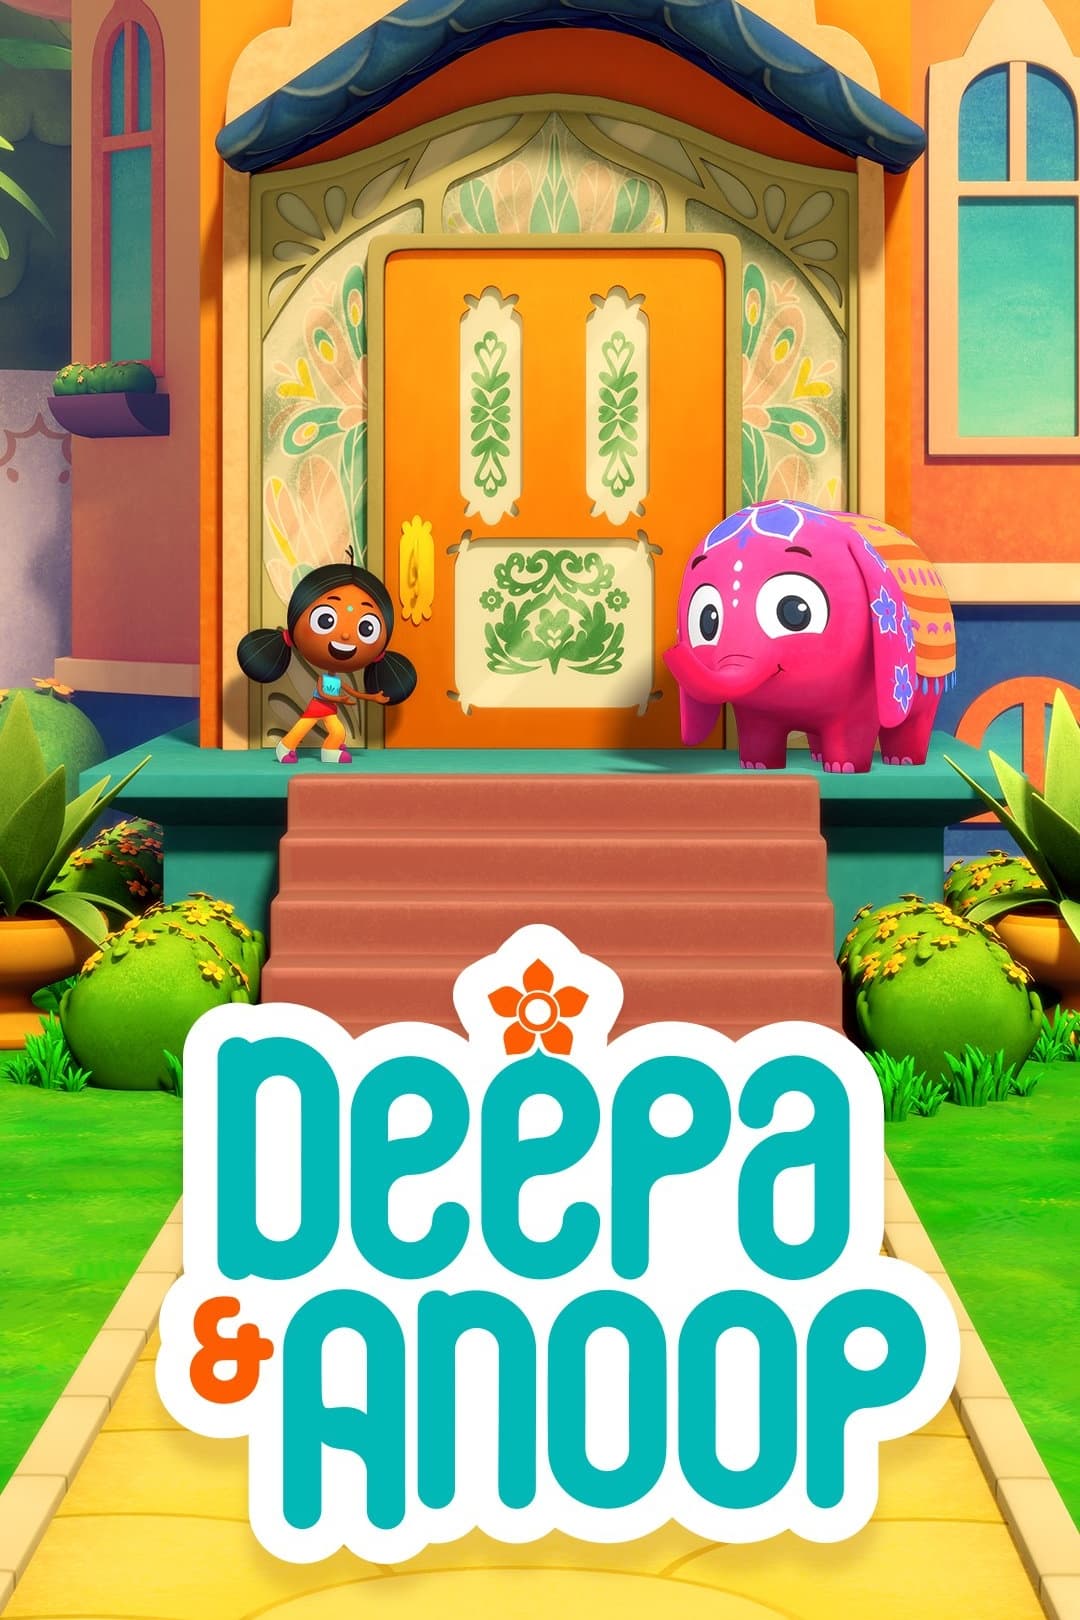 Deepa & Anoop TV Shows About Hotel